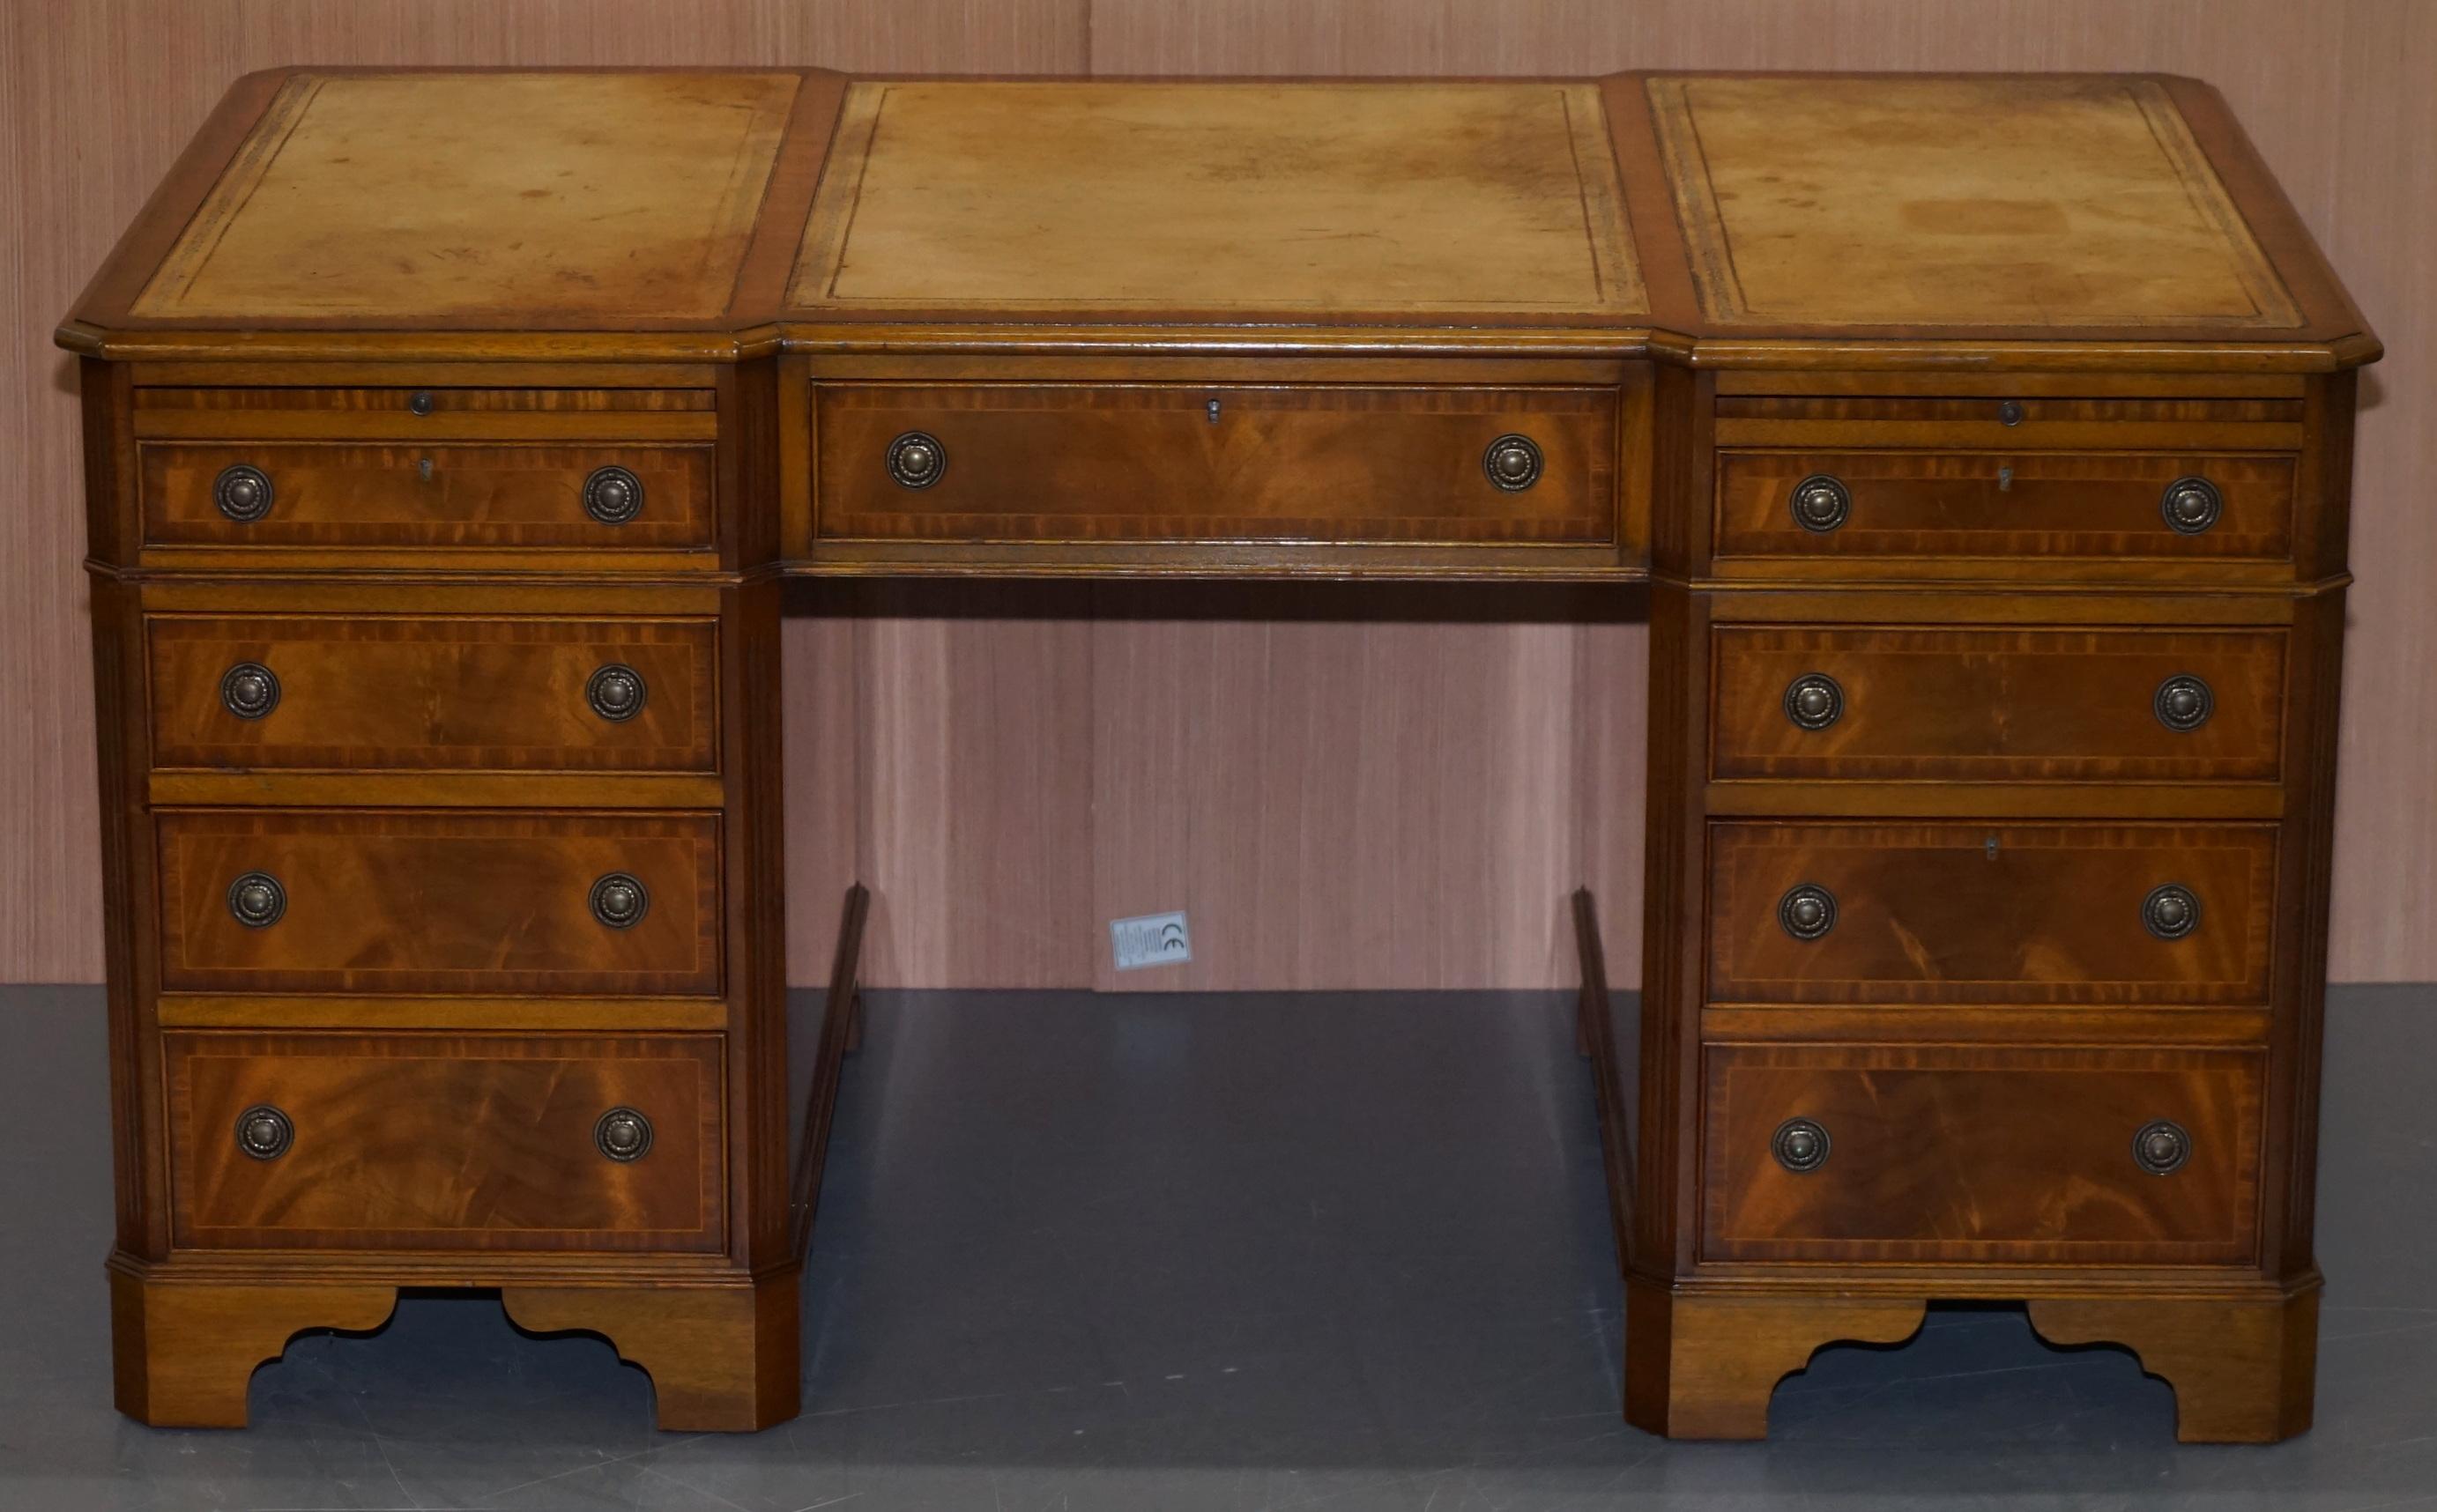 We are delighted to offer for sale this exceptional reverse breakfront twin pedestal partner desk hand made in England by the skilled craftsman at E.G Hudson

There are many companies out there making twin pedestal partner desks, they are all much